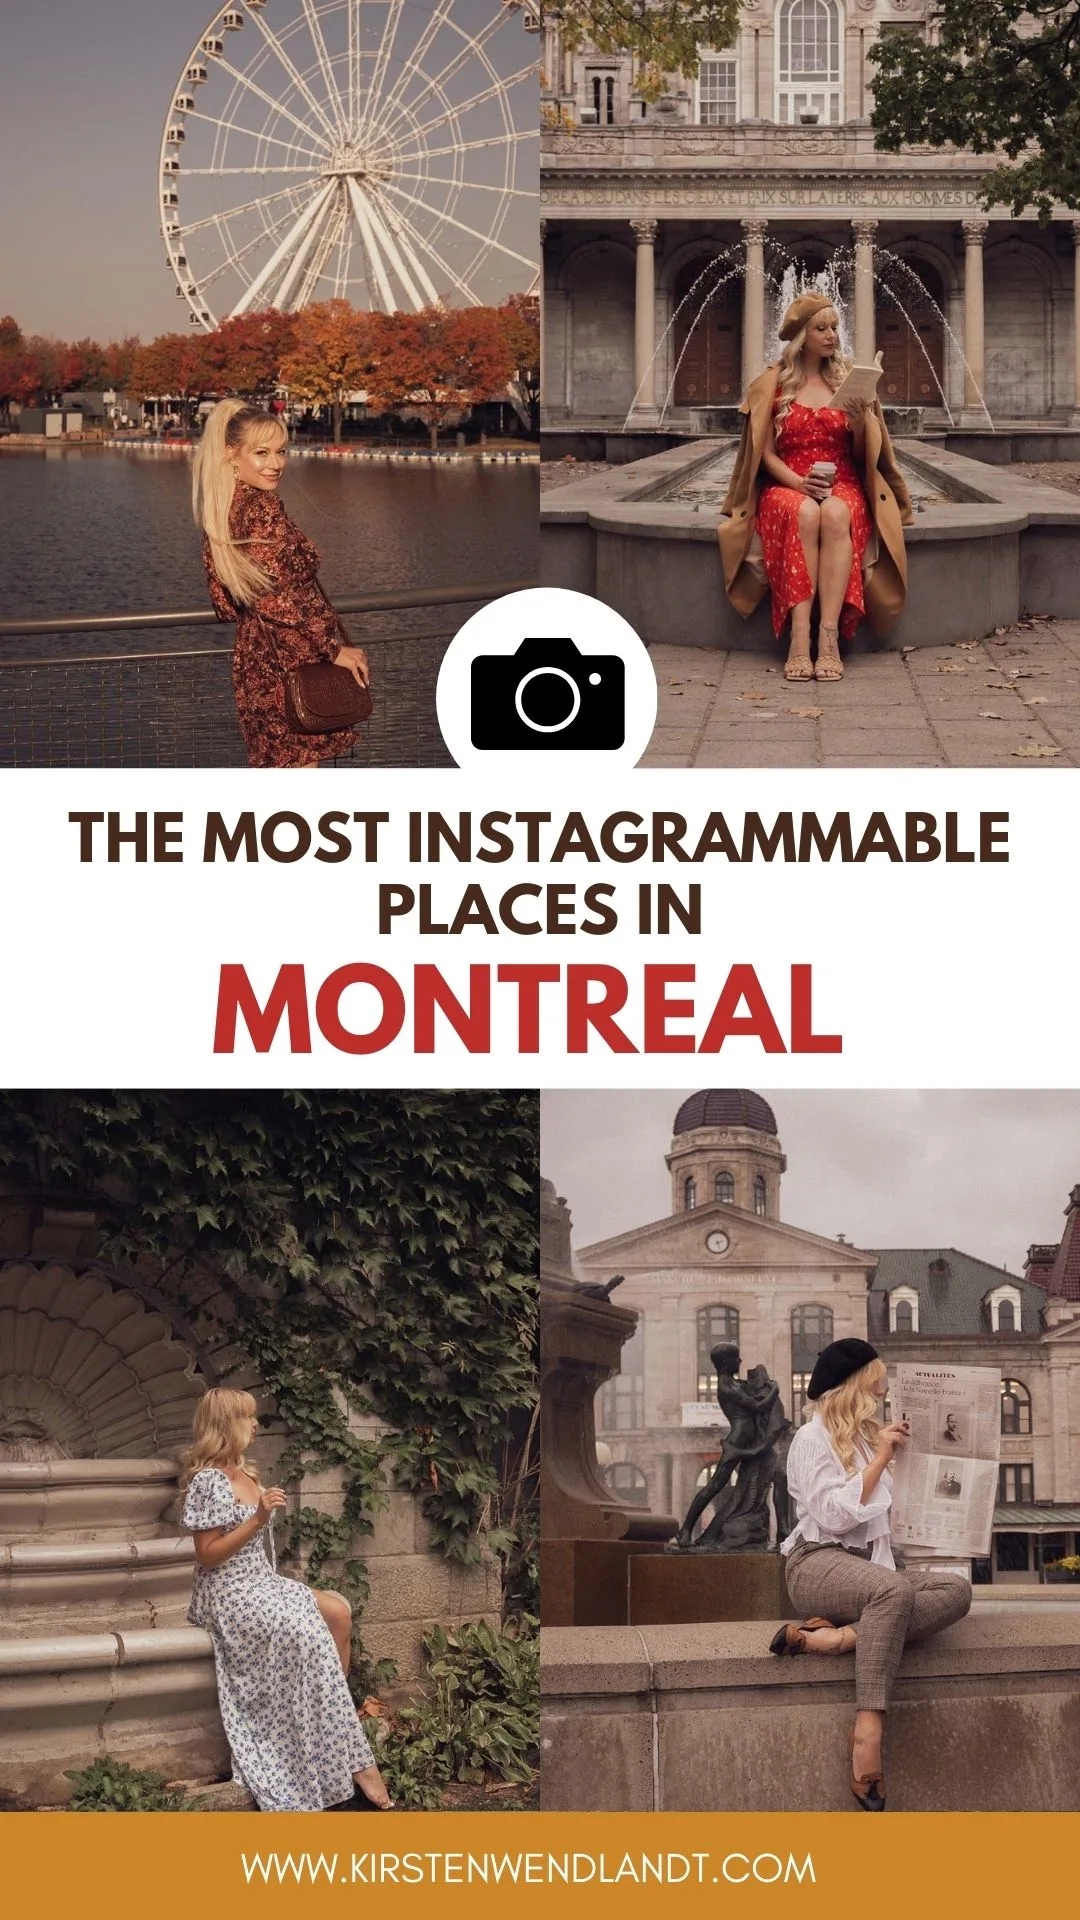 Montreal feels like a little slice of Europe in Canada, and it's no surprise that most people who visit immediately fall in love with it's old world charm. From the gorgeous old architecture, cute cafes and cobblestoned streets, and beautiful parks, there's more than enough places here to snap your next instagram photo. If you're planning on visiting Montreal soon and hoping to get some great photos while you're there, you definitely won't want to miss this guide on the most instagrammables places in Montreal!